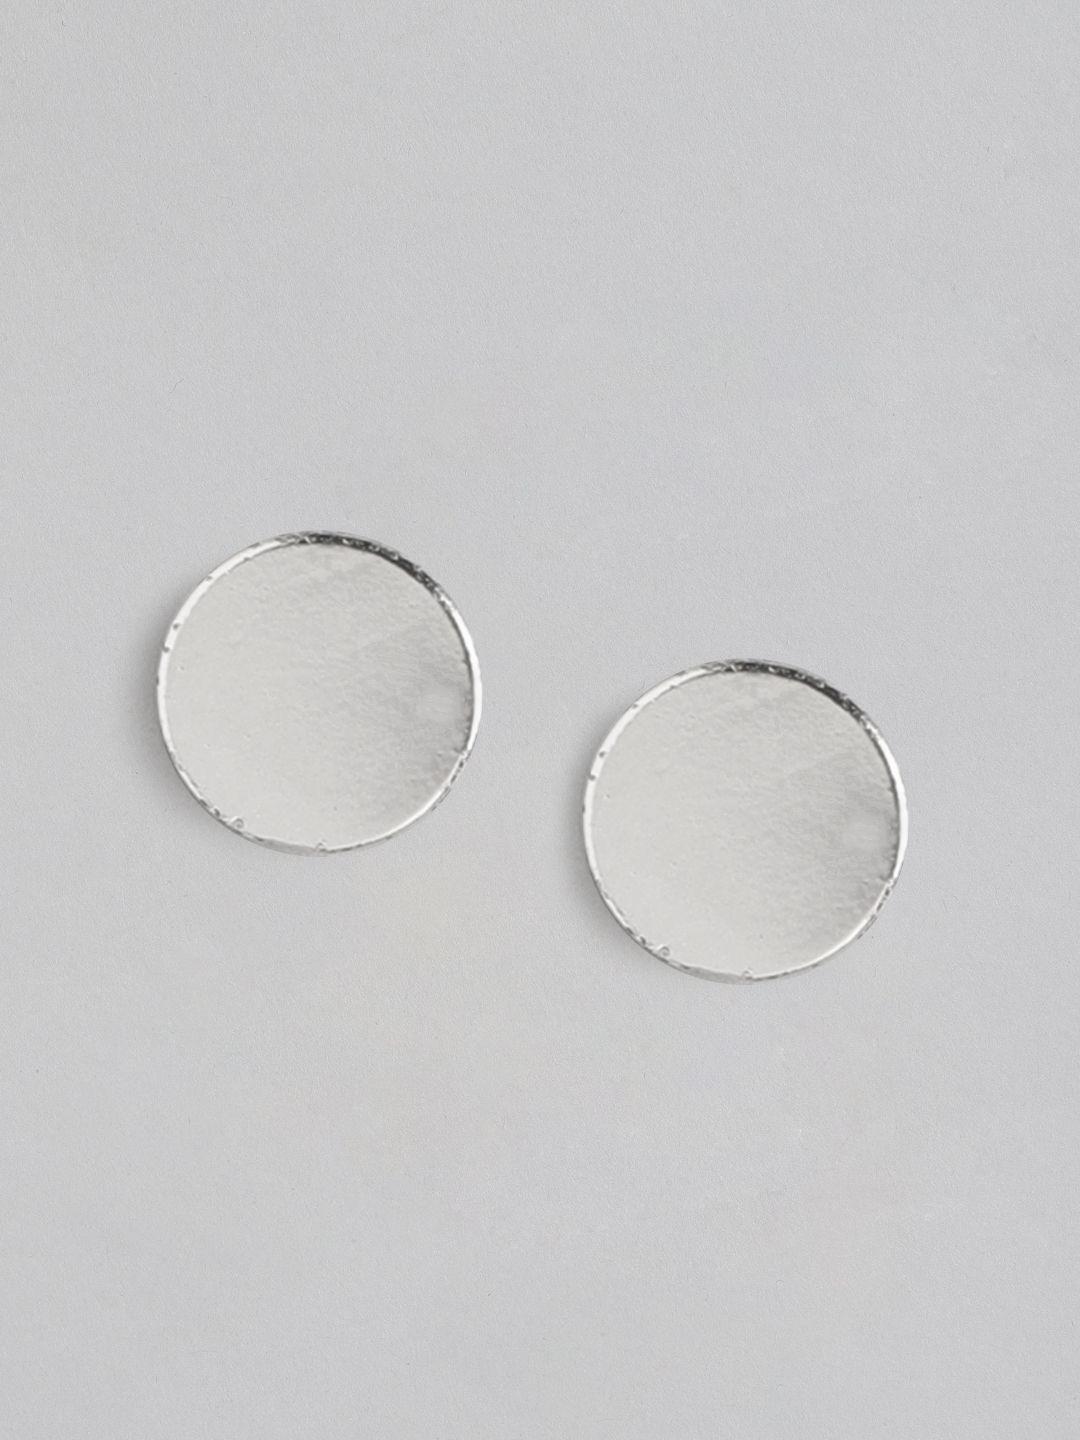 forever new silver-plated circular studs earrings